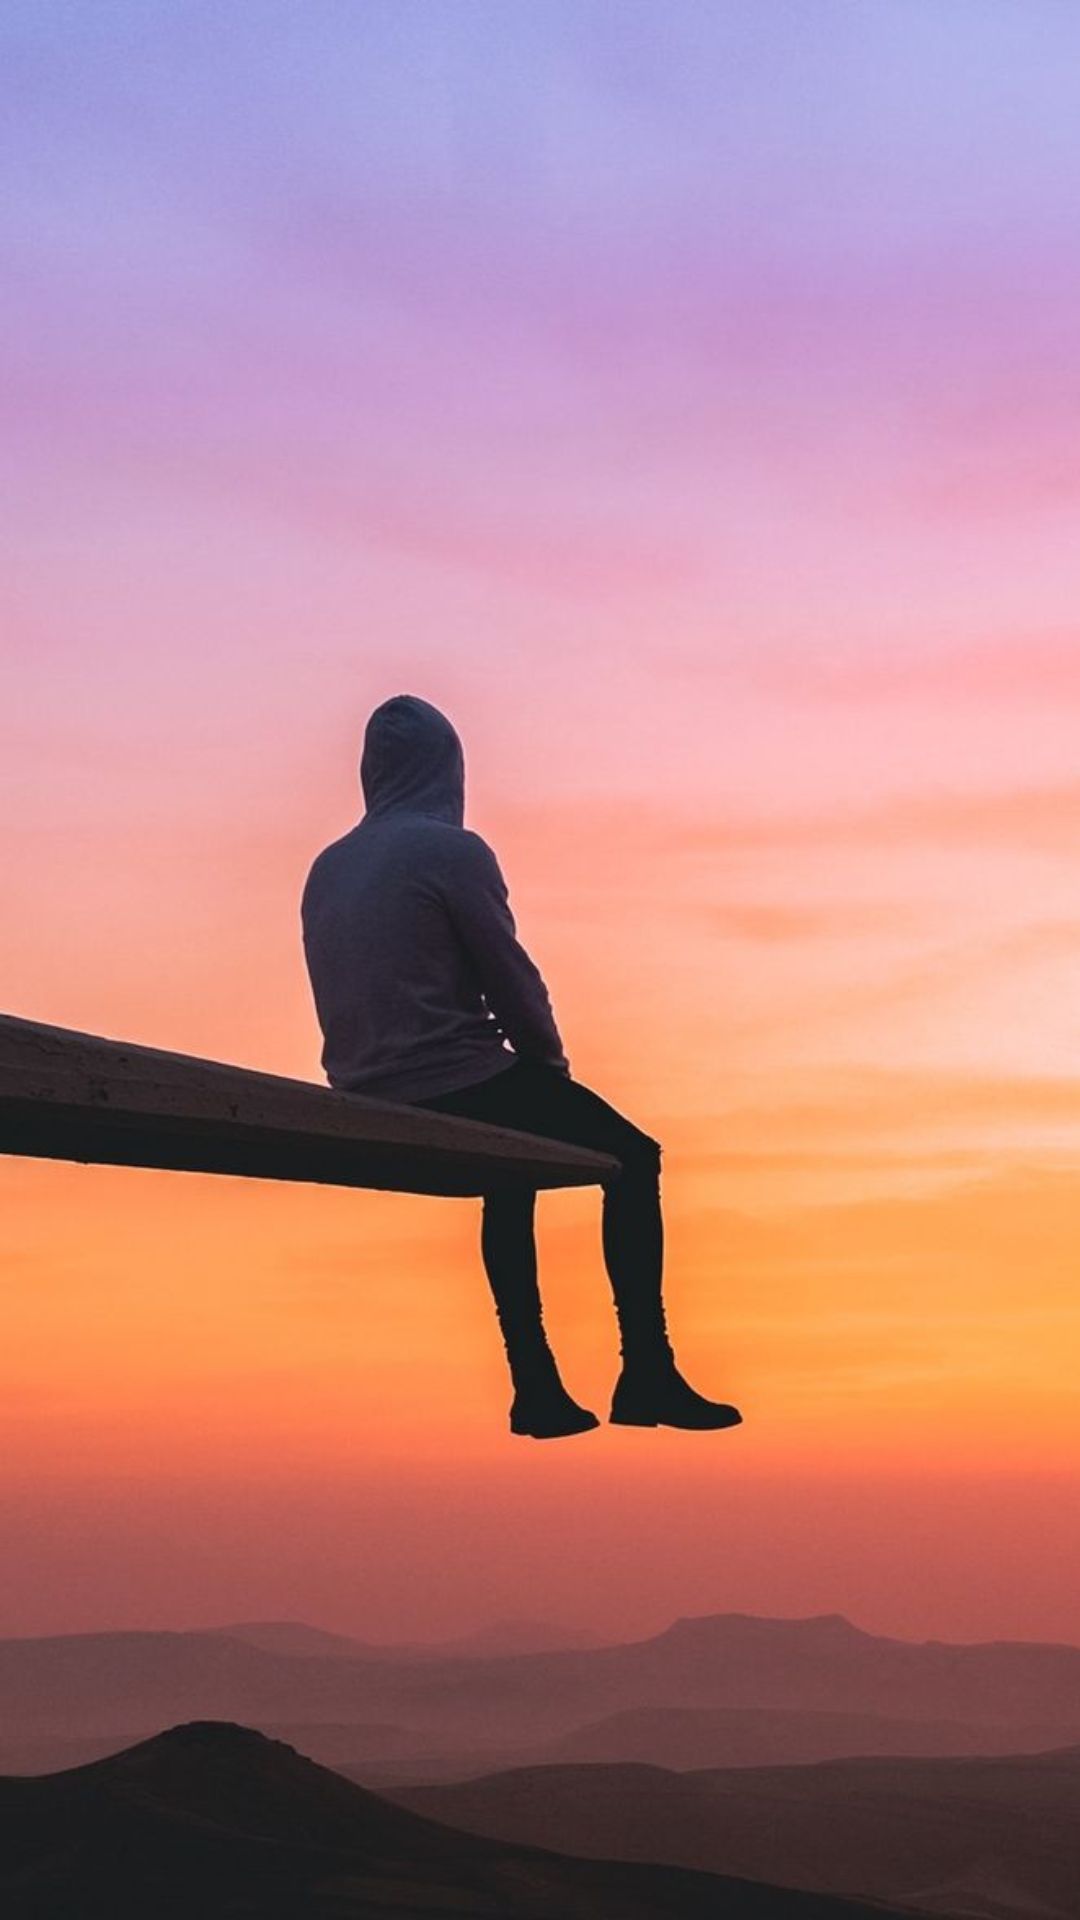 A person sitting on a ledge watching the sunset - Calming